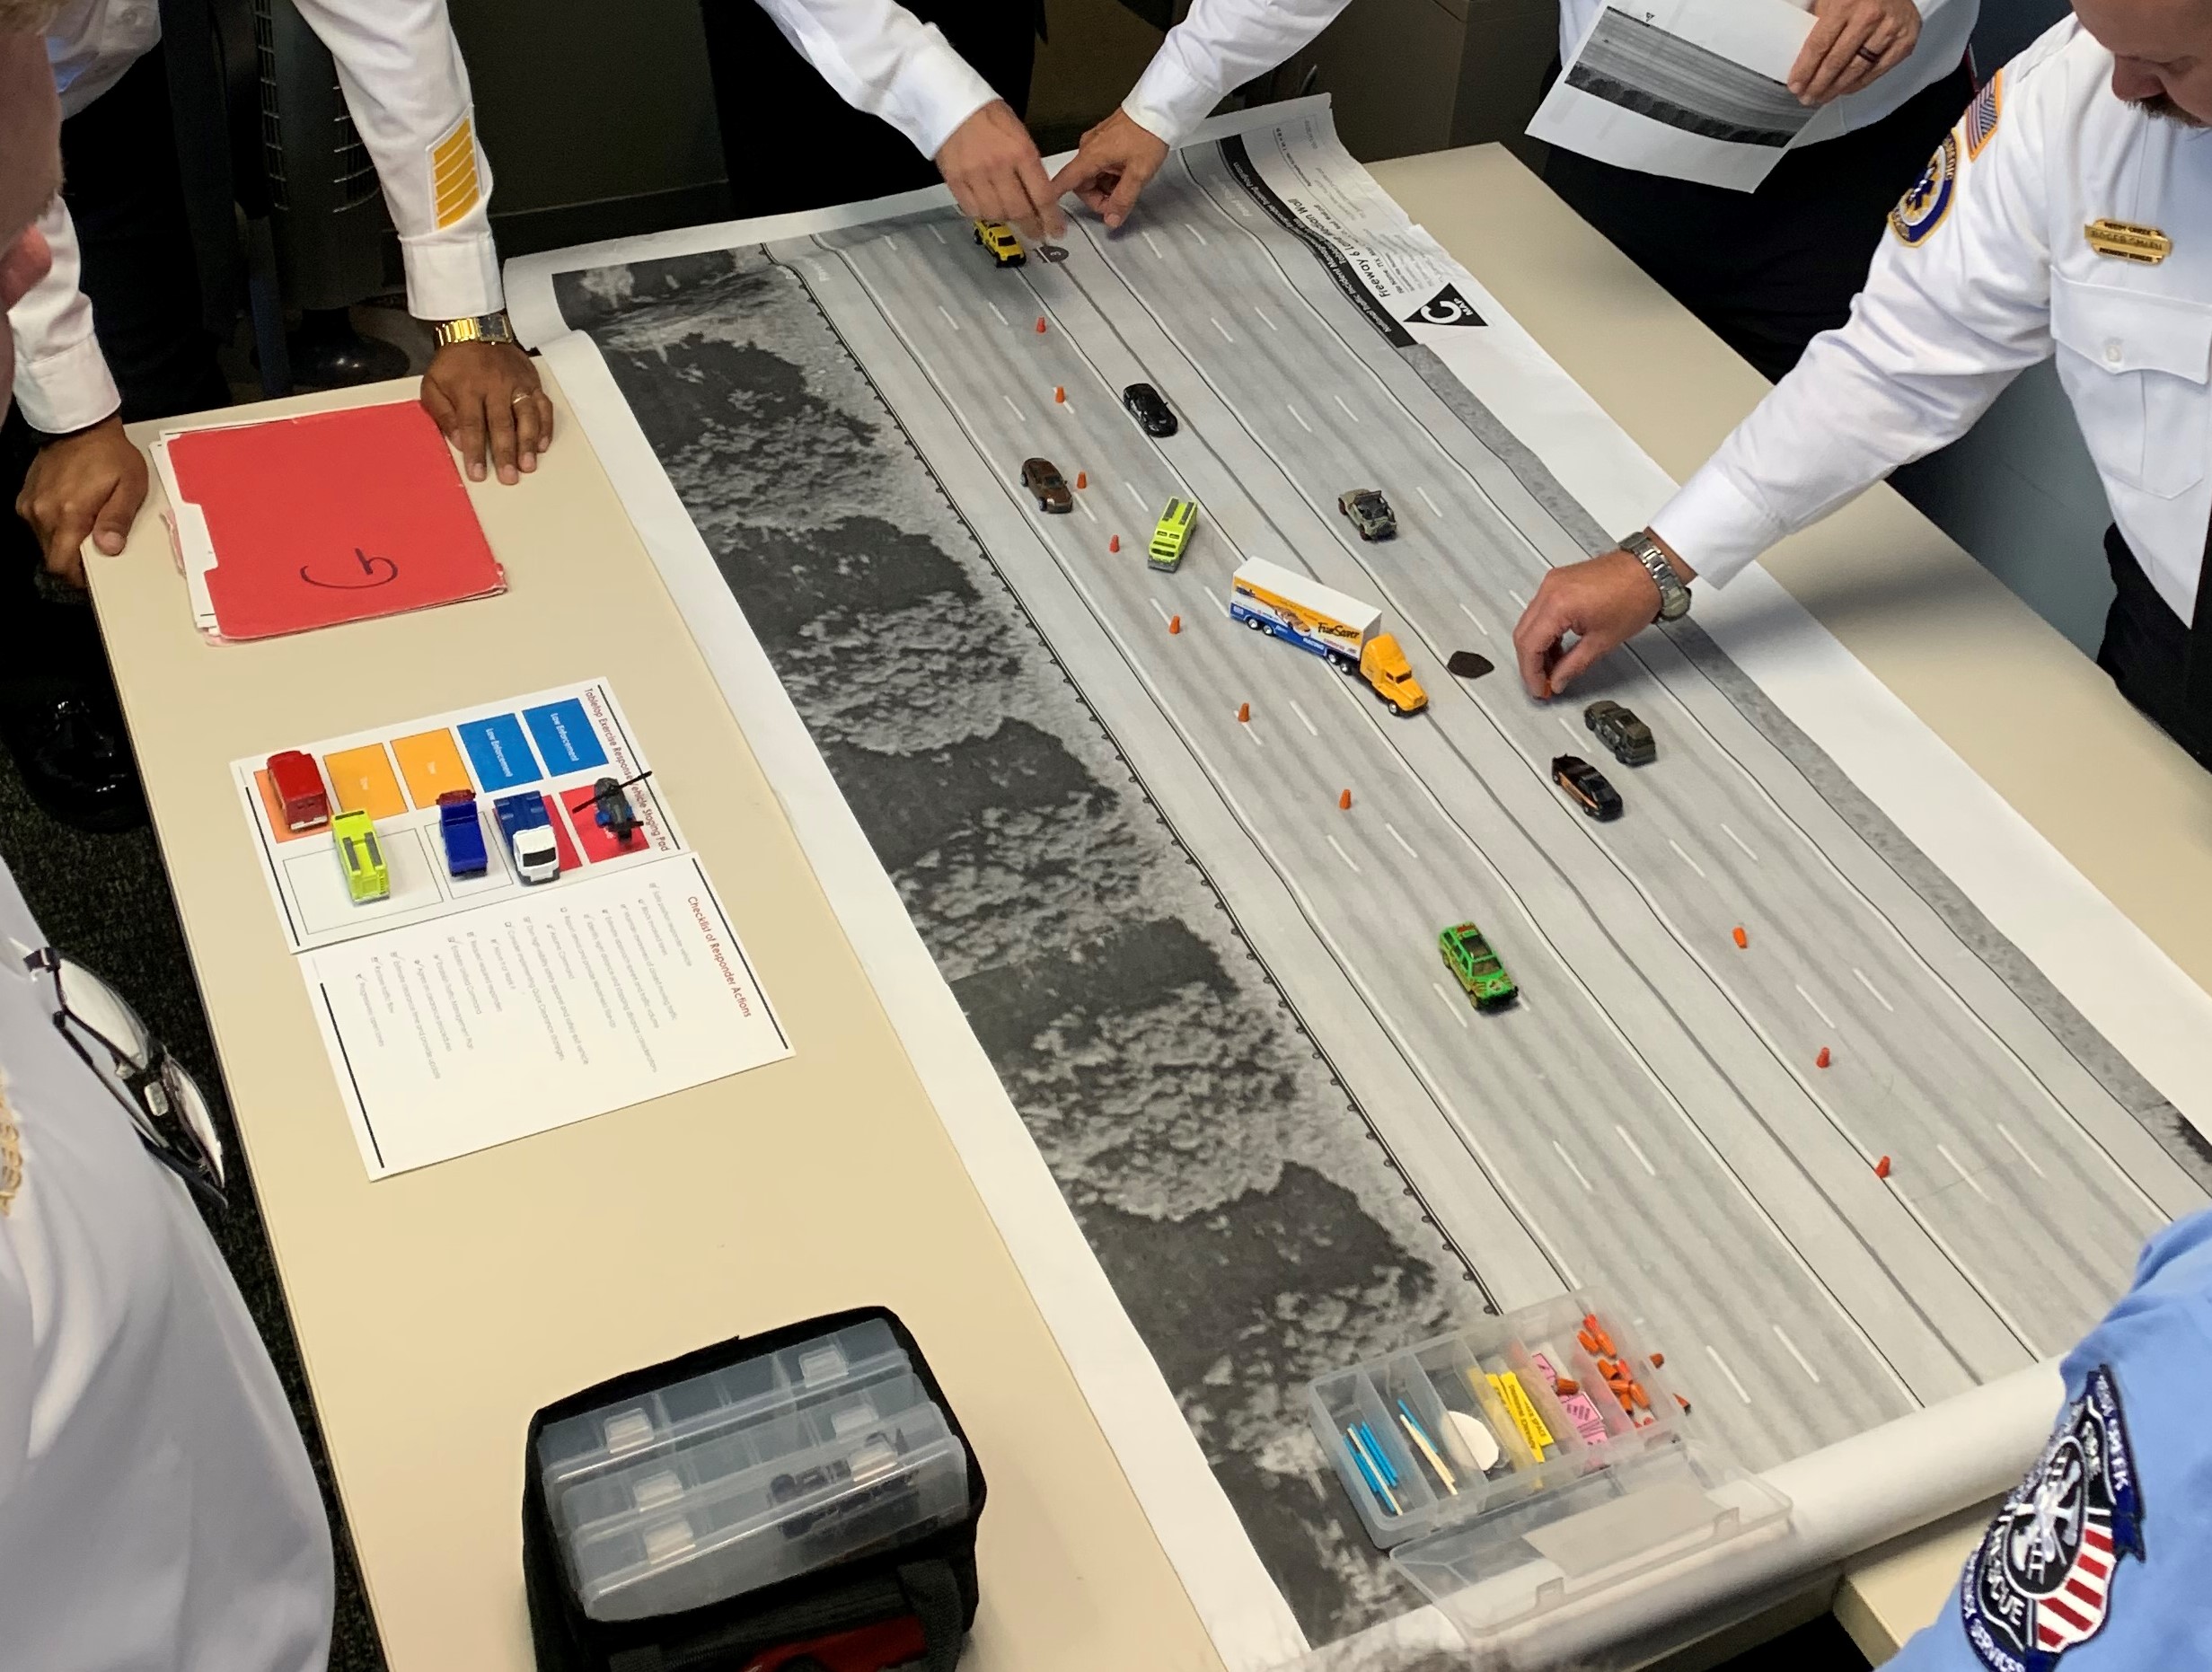 Multiple people standing at a tabletop learning exercise with a large printout of a roadway and toy vehicles to practice traffic incident management scenarios.